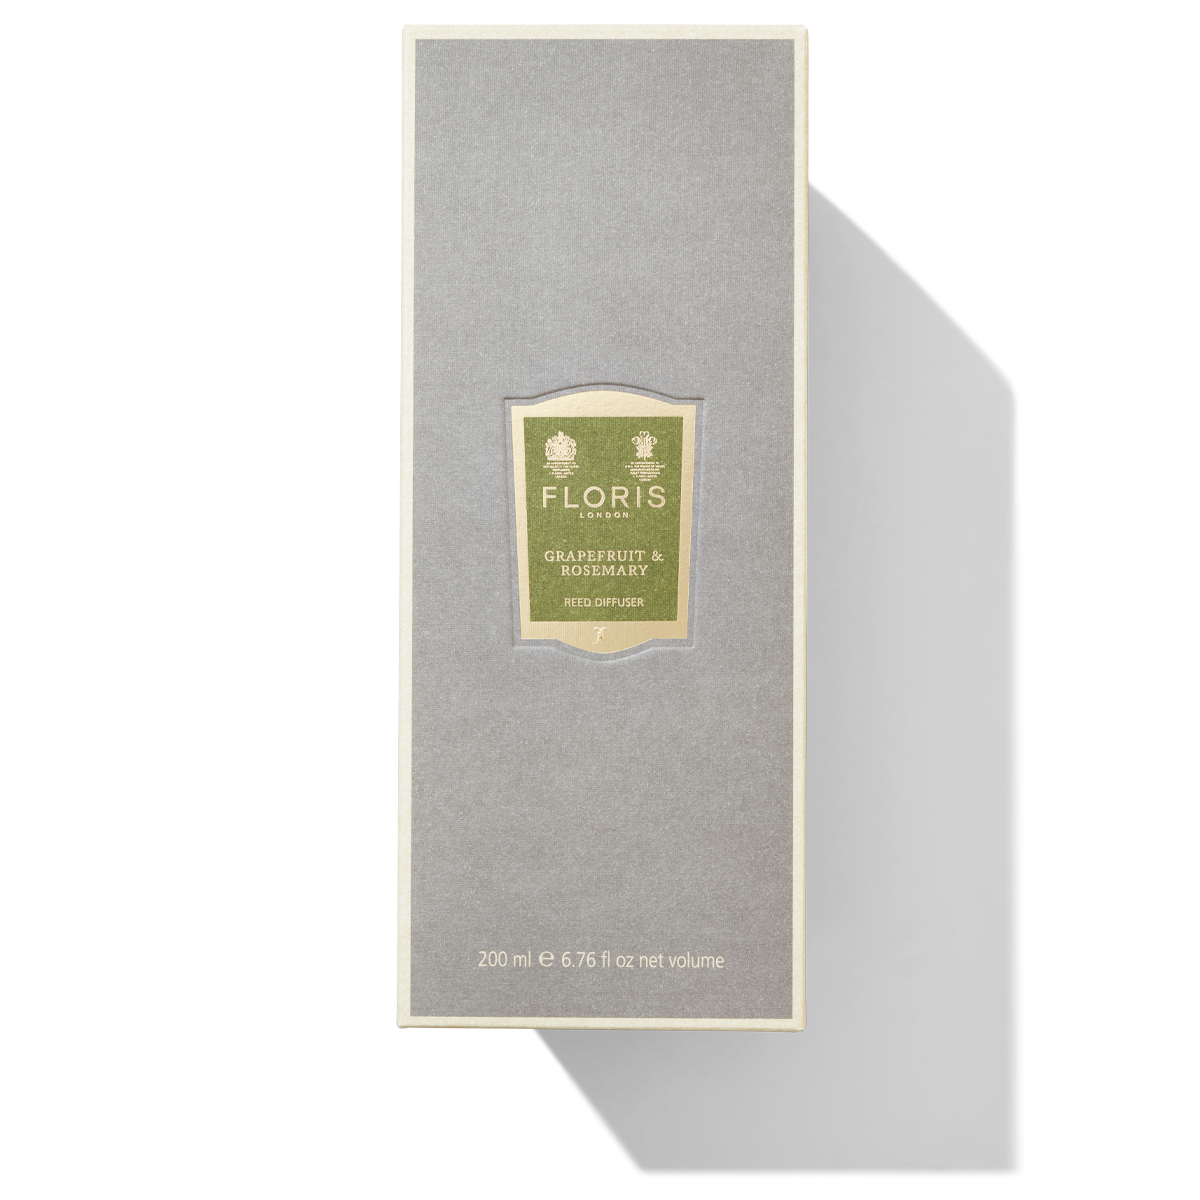 Grey box with green and gold label for the grapefruit and rosemary reed diffuser.